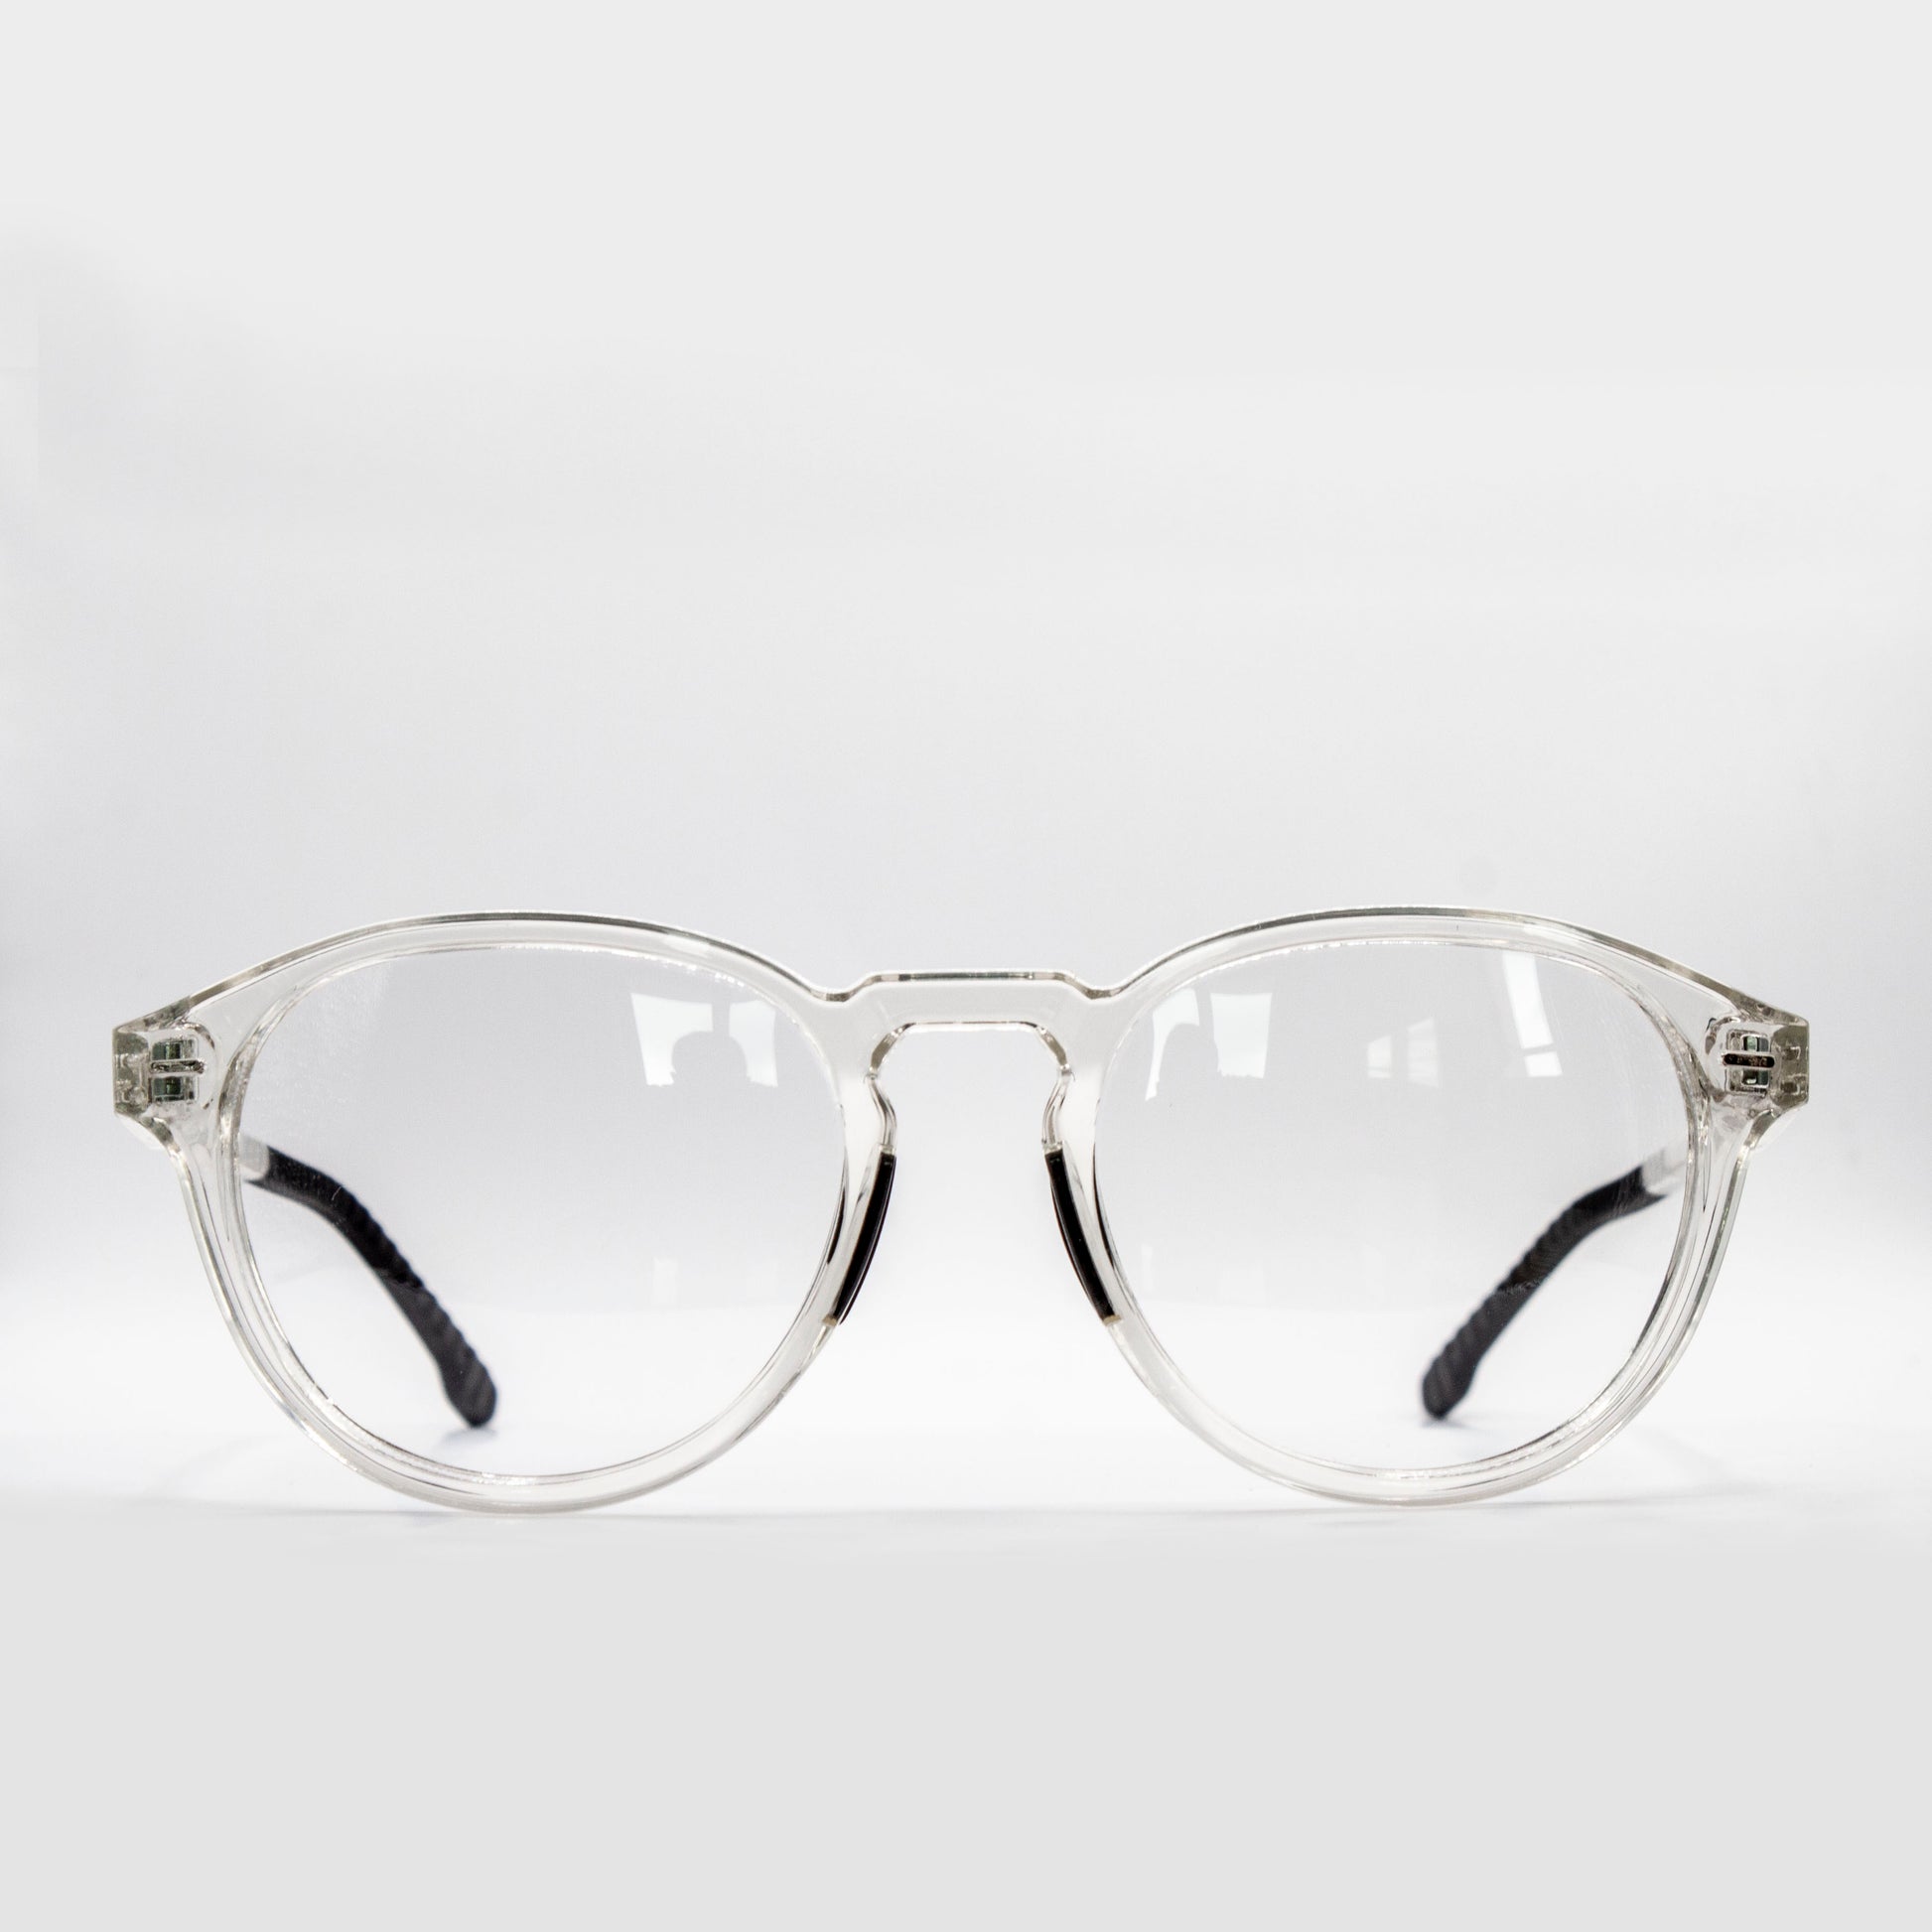 Snowshades photochromic sunglasses - front view